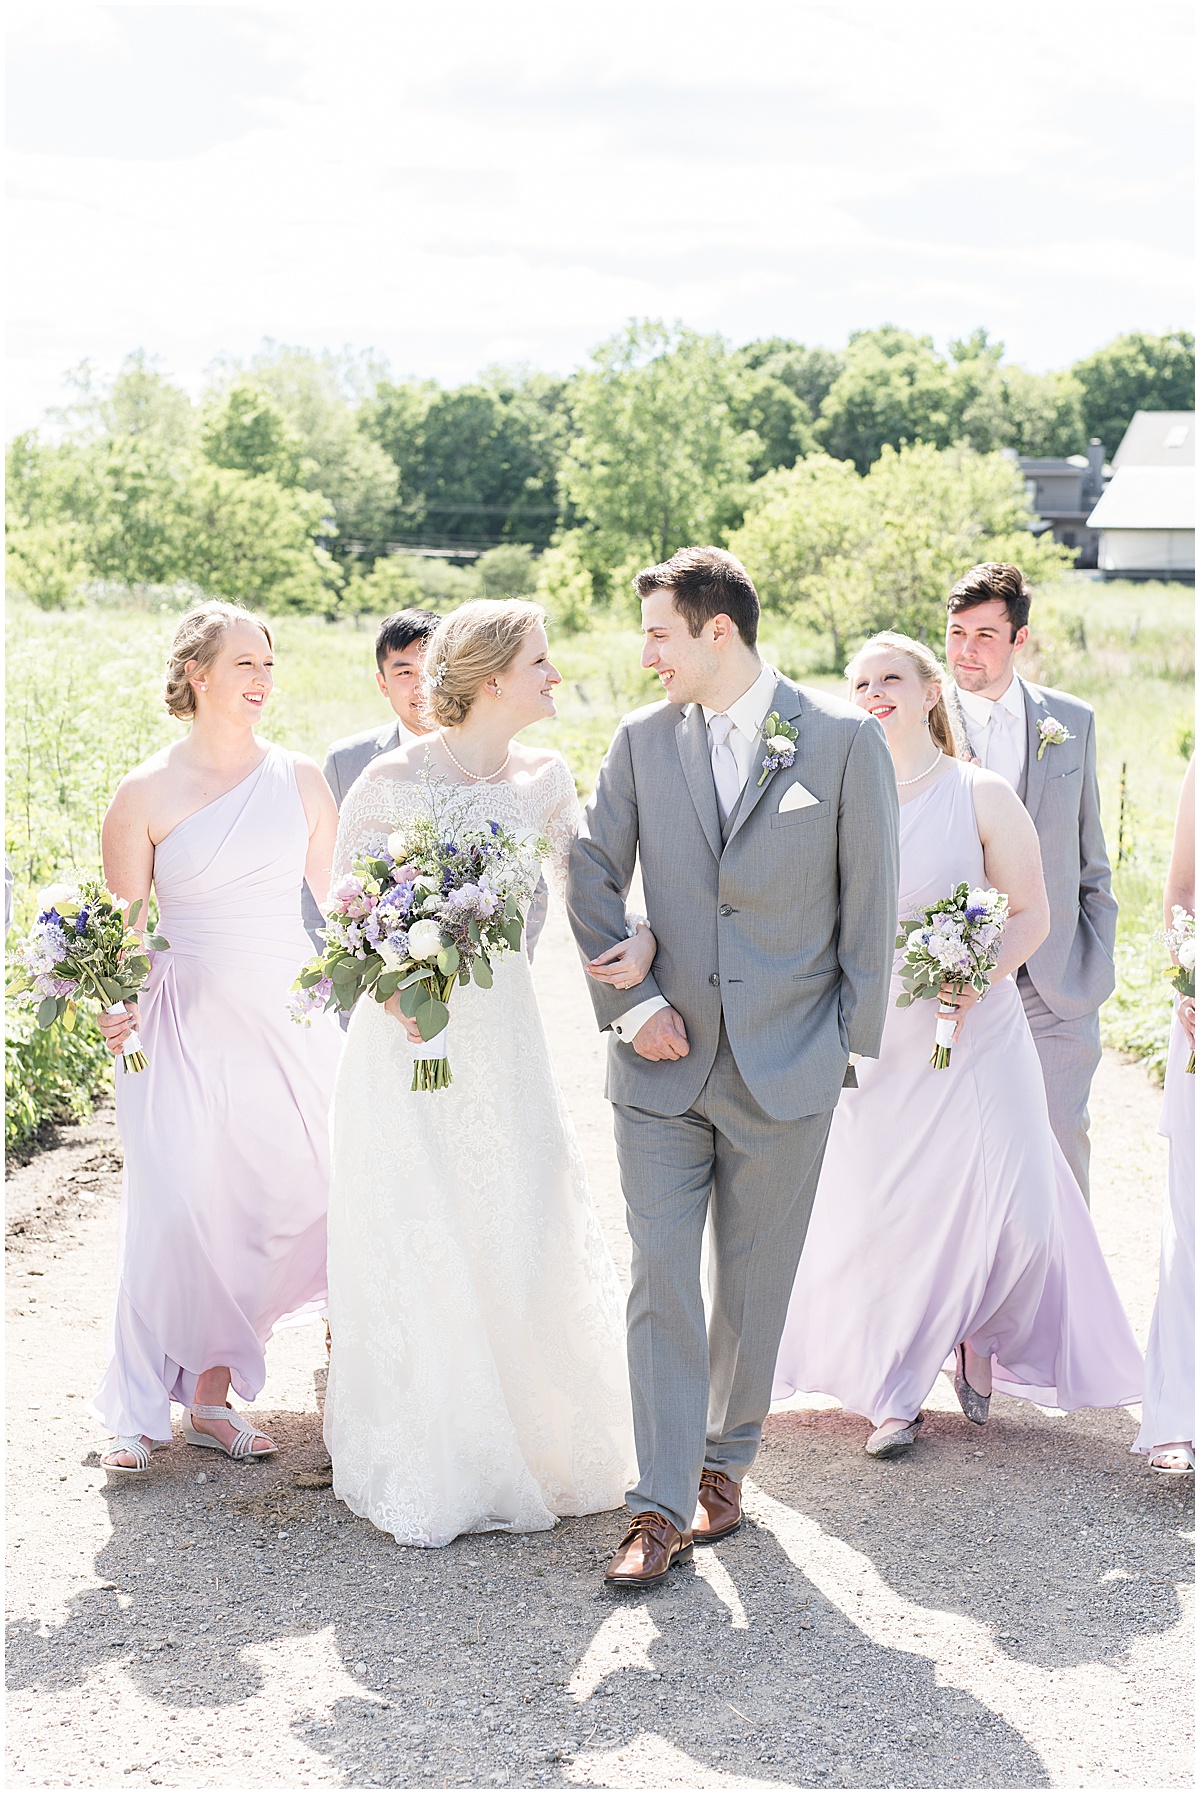 Bridal party photo at Traders Point Creamery wedding in Zionsville, Indiana